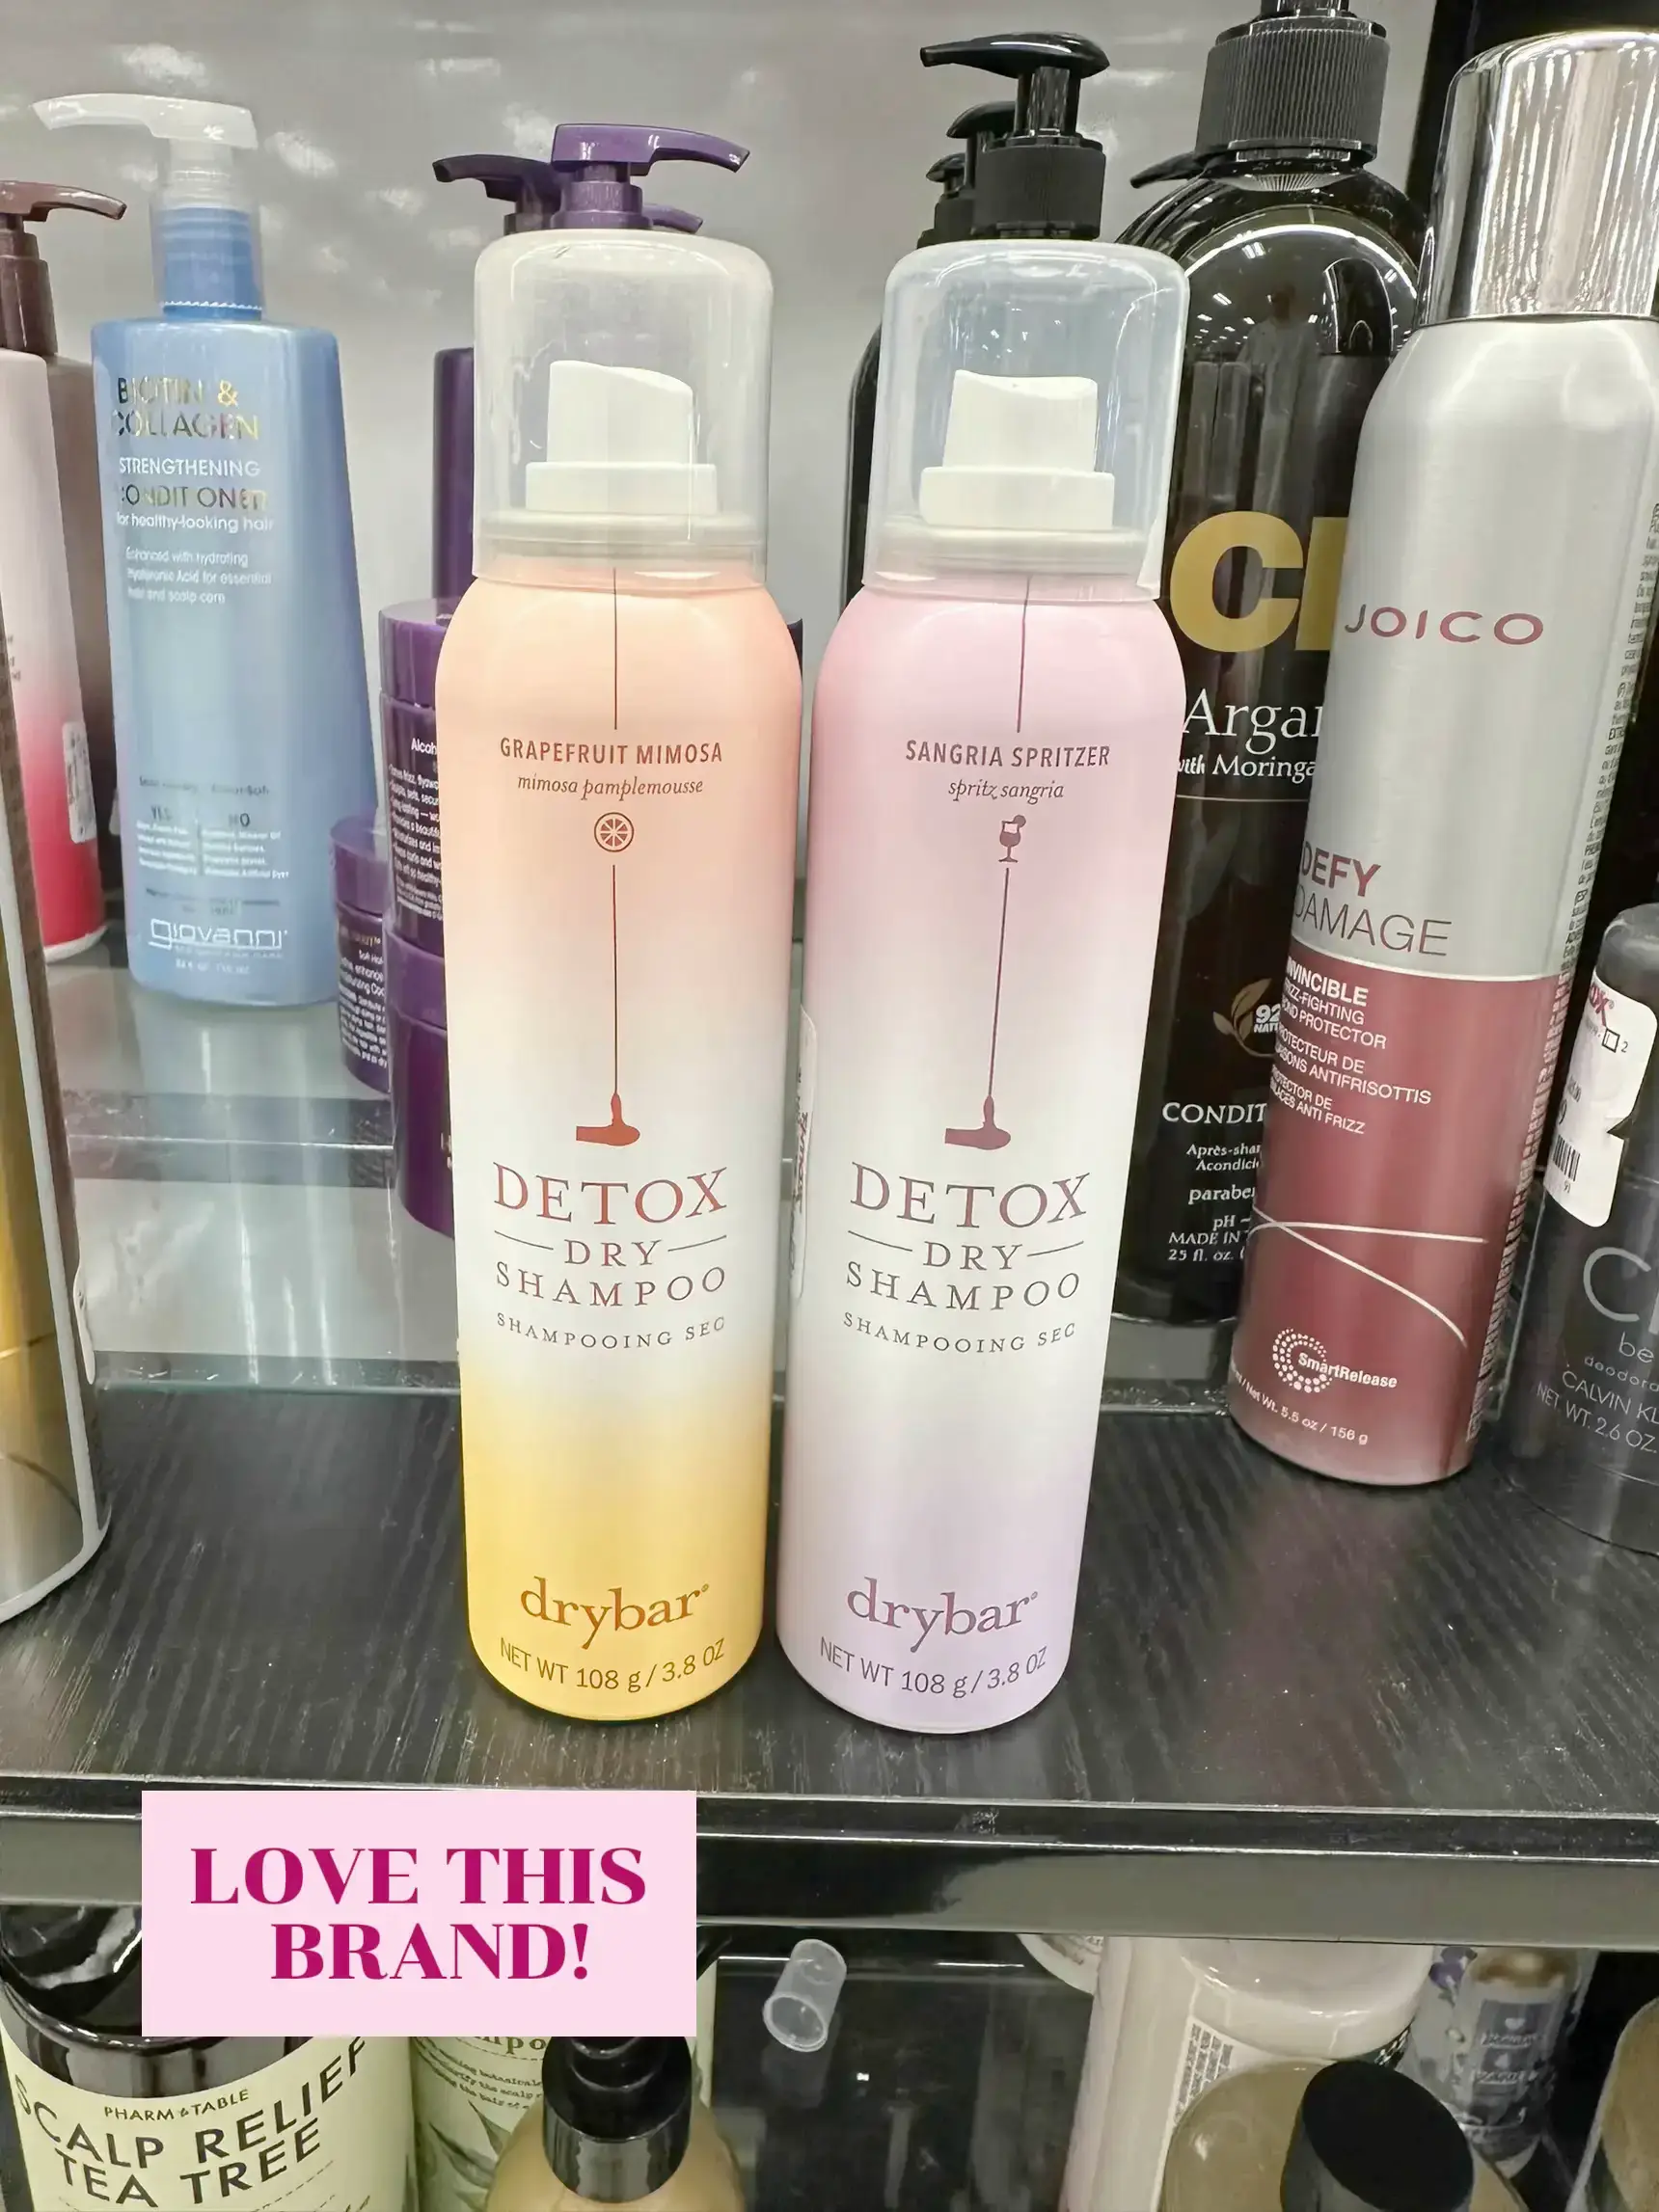 SOBE LUXE - Smoothing Shampoo for All Hair Types, Sulfate Free 10 Oz -  Moisturizes, Strengthens, Protects Color and Repair - With Panthenol and  Amino